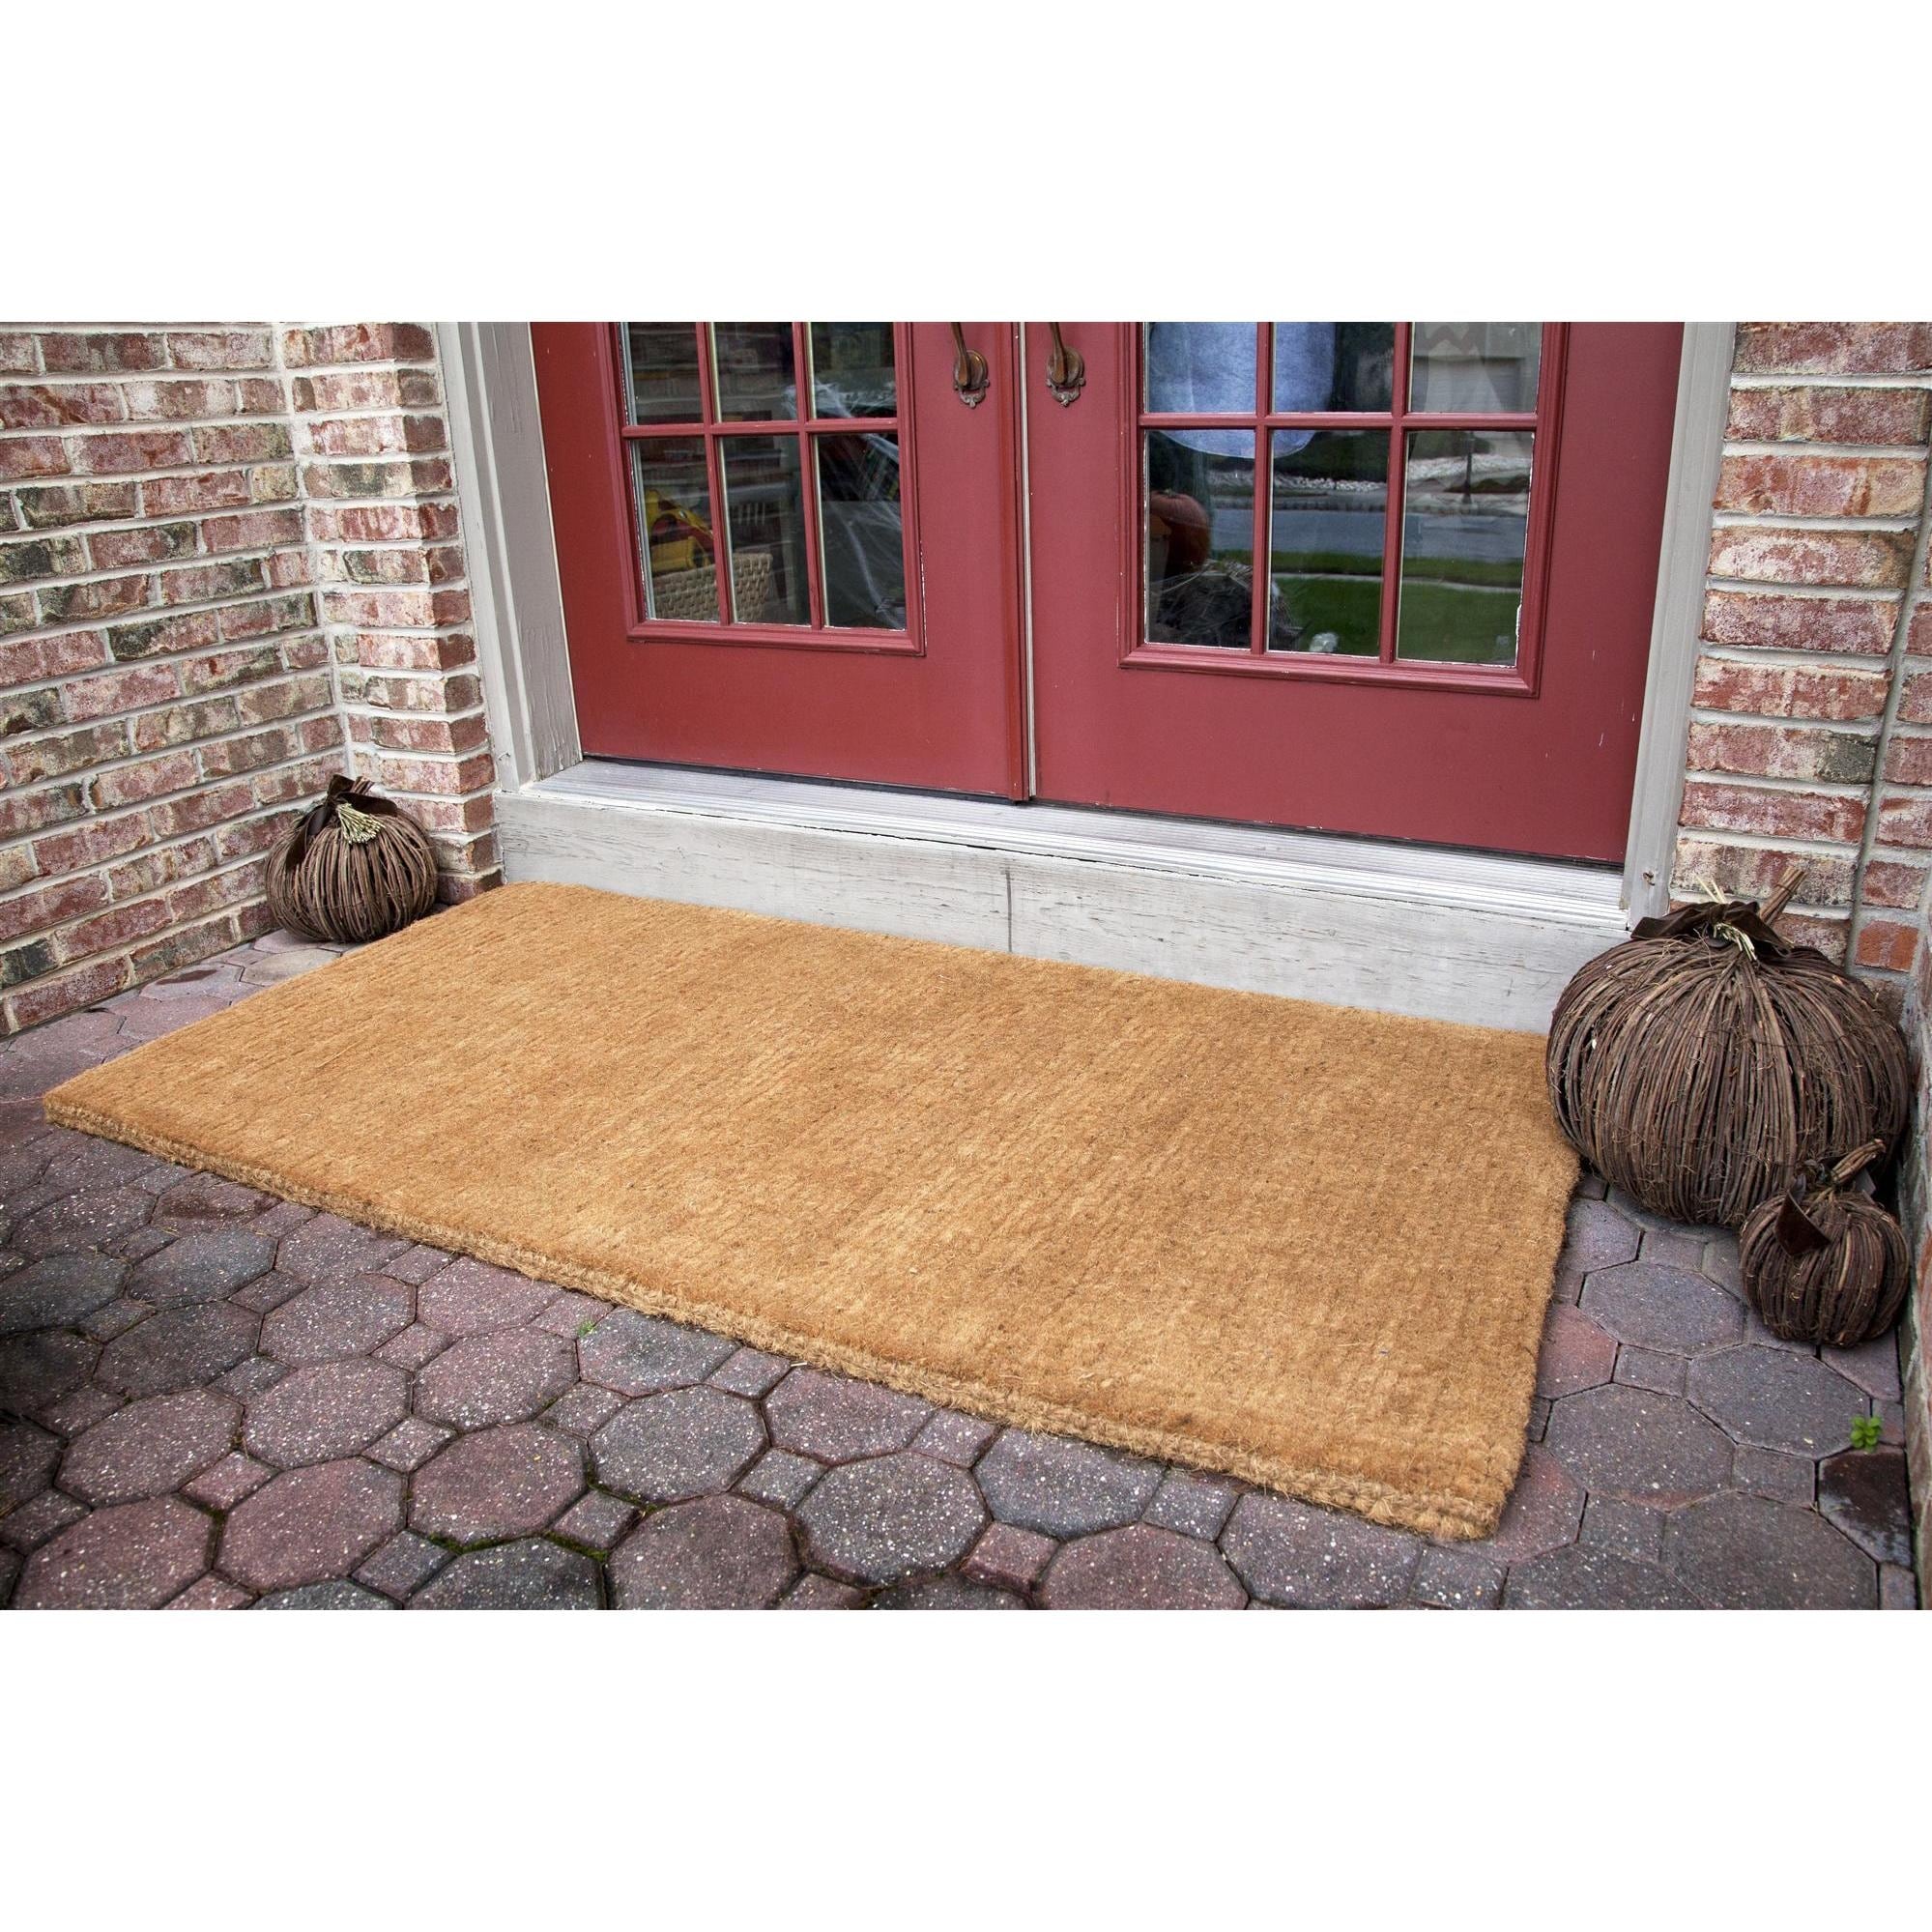 A1HC Natural Coir & Rubber Door Mat, 30x48, Thick Durable Doormats for Outdoor  Entrance - On Sale - Bed Bath & Beyond - 11391440